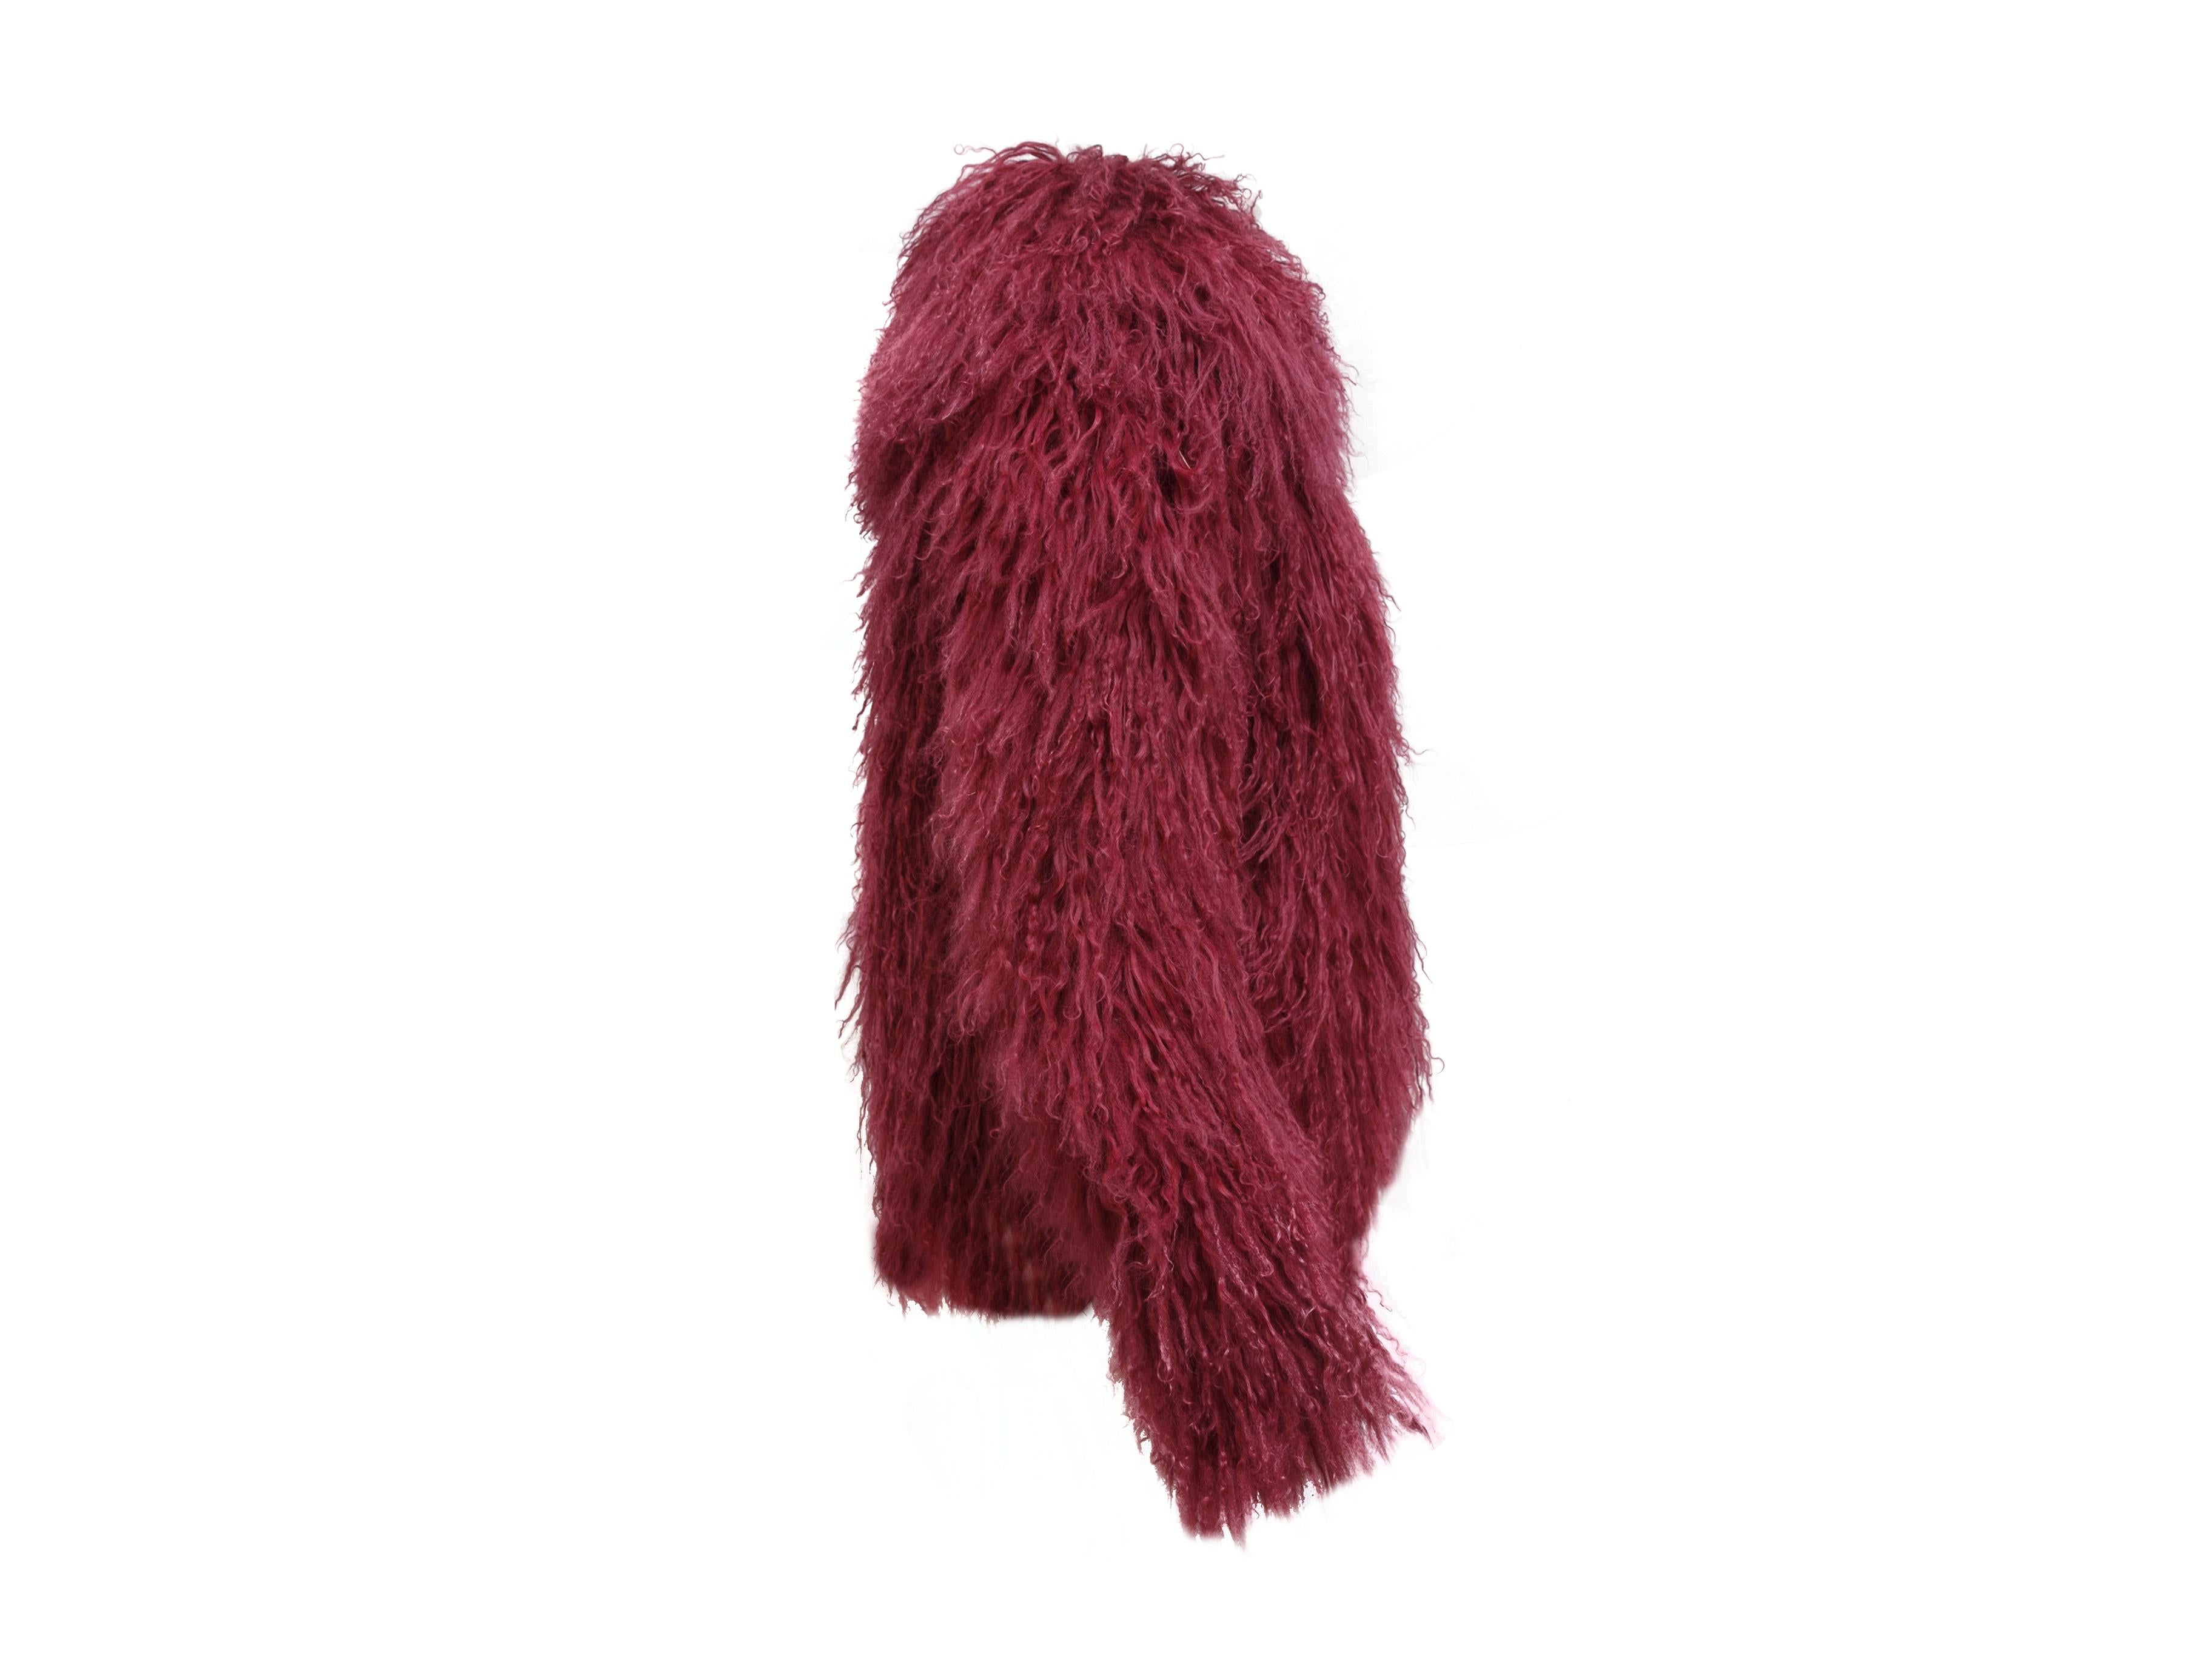 Product details:  Cranberry/Purple  Gucci Mongolian Lamb Jacket. Mongolian Lamb is sometimes known as Curly Lamb, as the fur has long curls. This Gucci fur jacket has a wide collar and hook and eye closures. 38